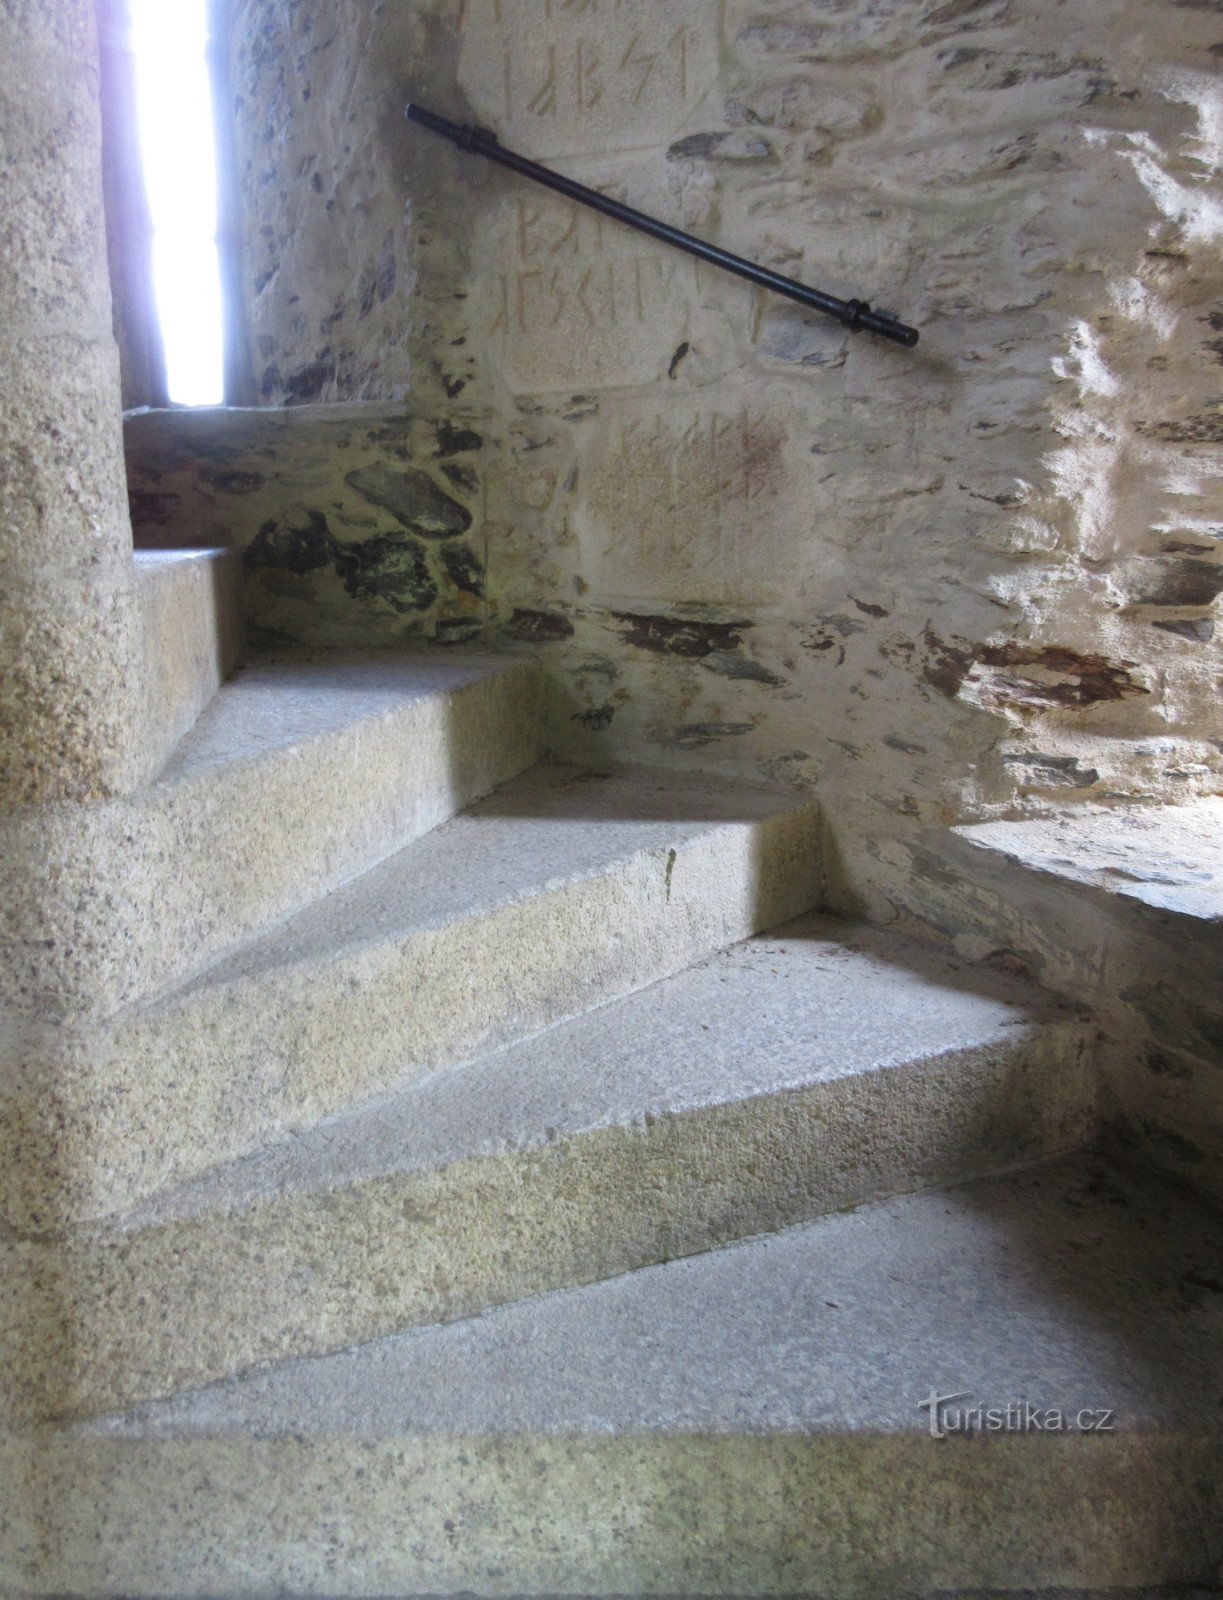 Stairs to the lookout tower